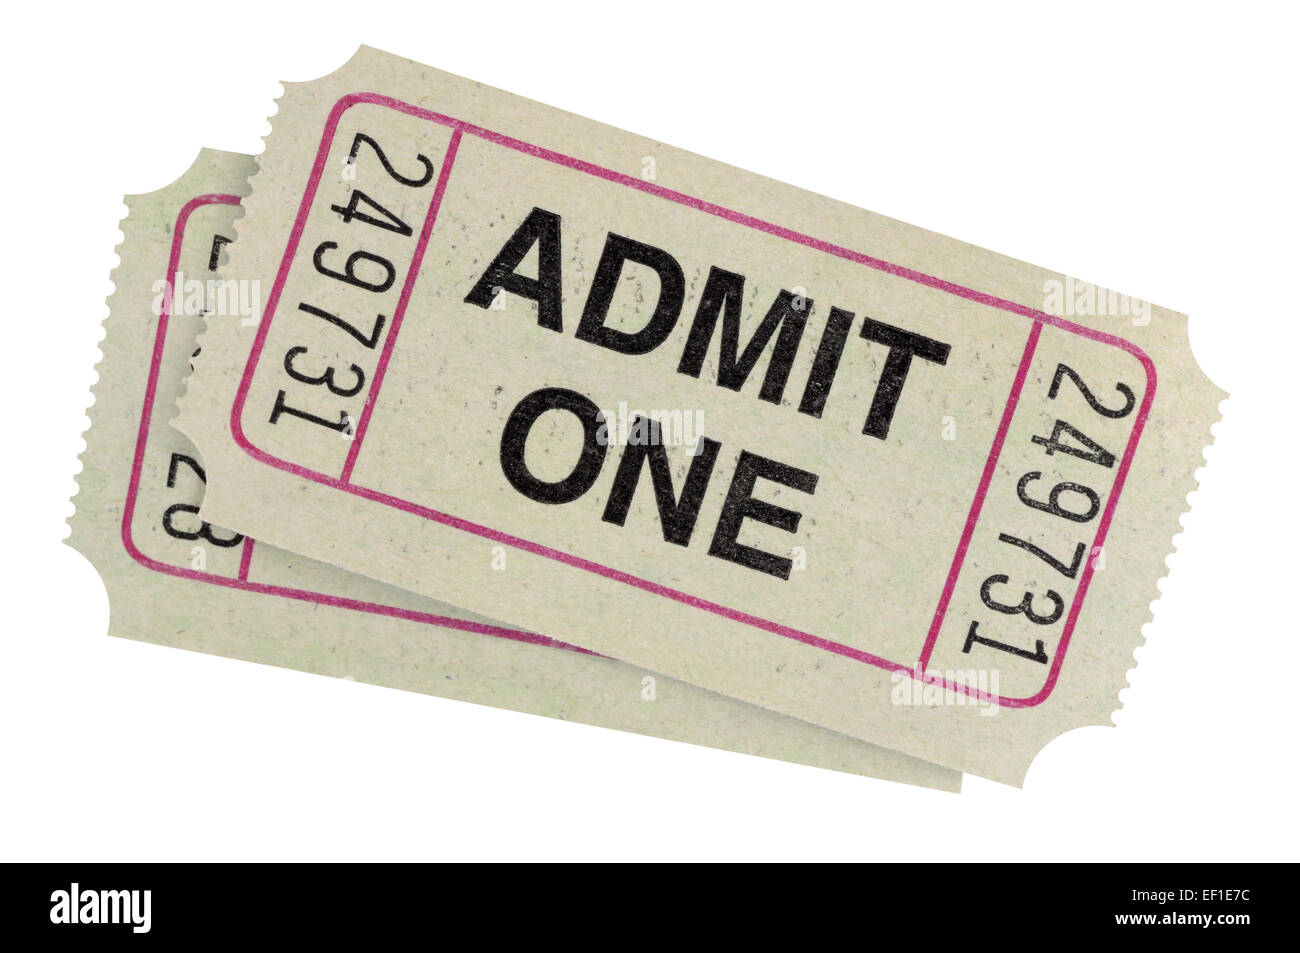 Pair of admit one tickets isolated on white background. Stock Photo